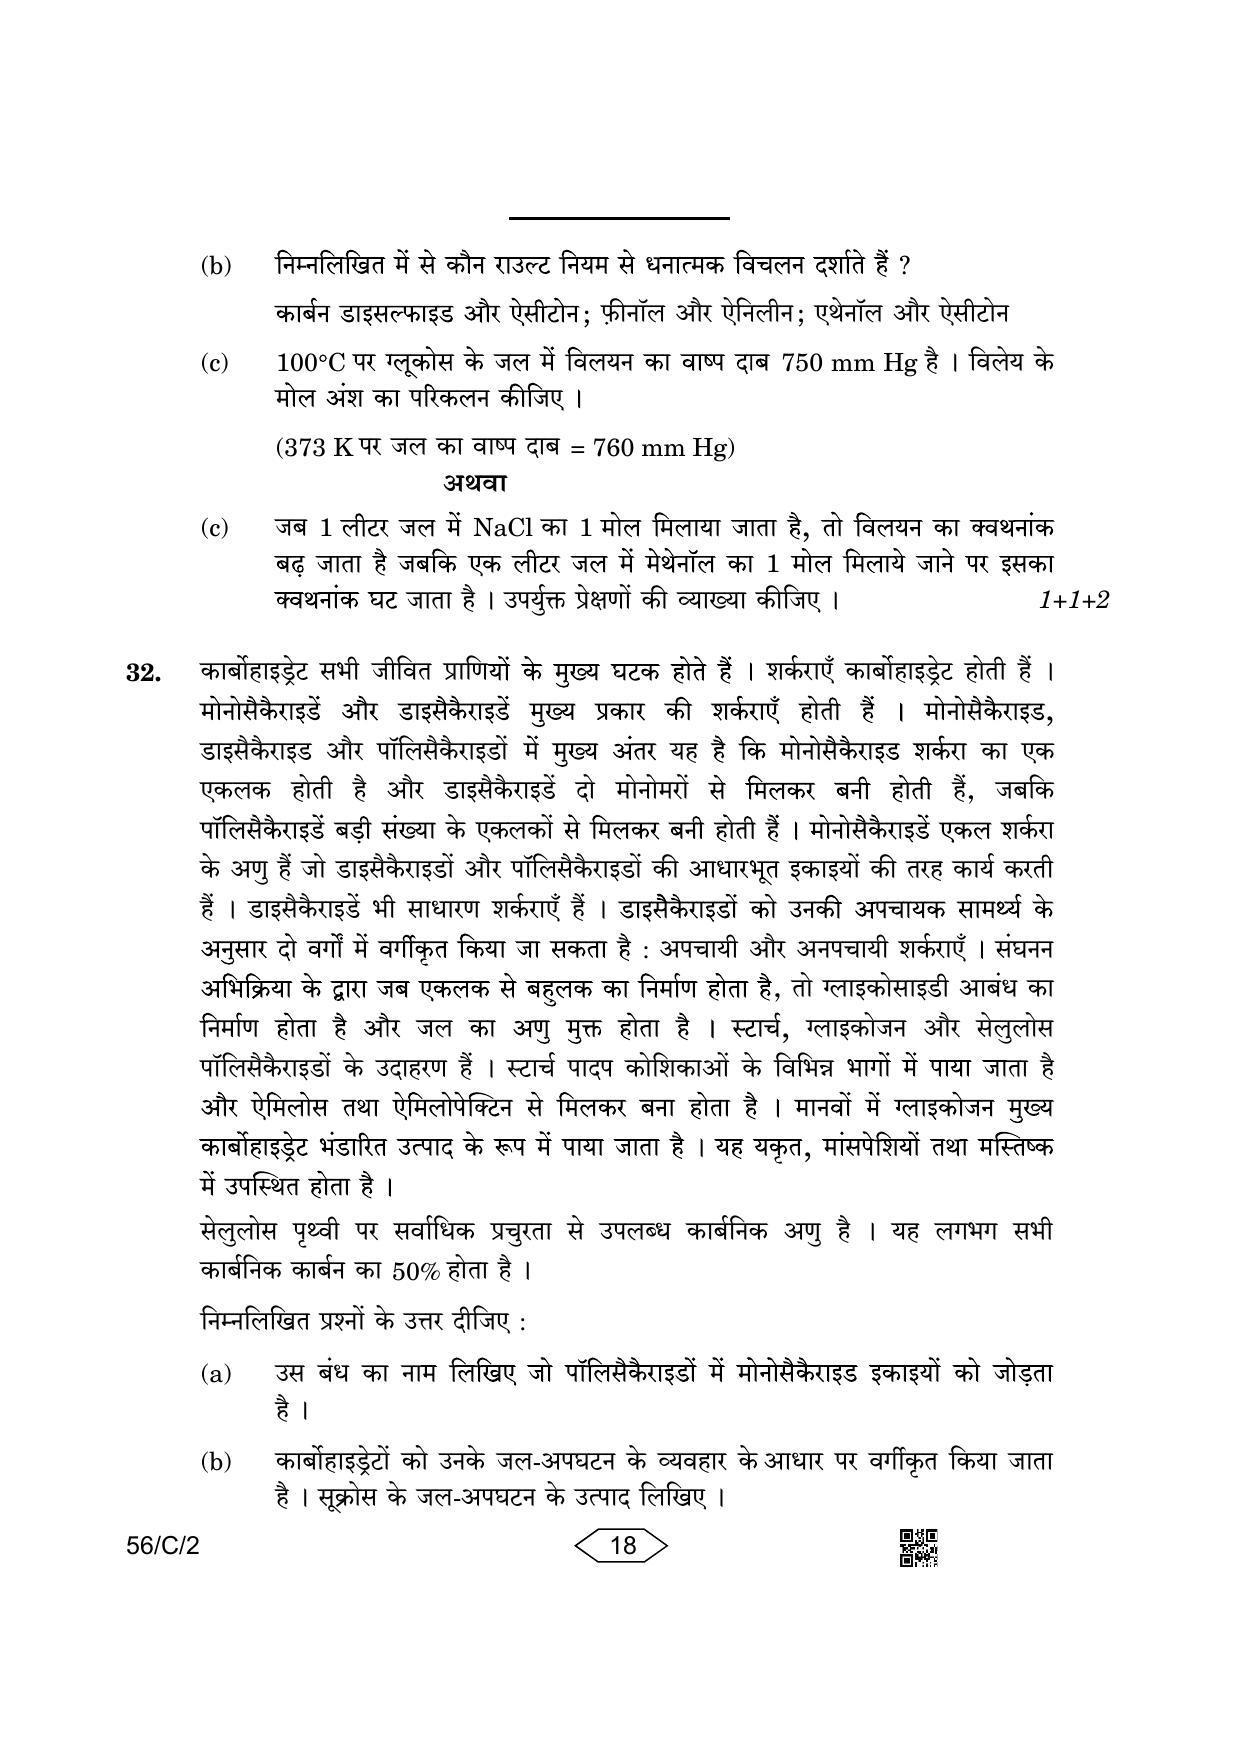 CBSE Class 12 56-2 Chemistry 2023 (Compartment) Question Paper - Page 18